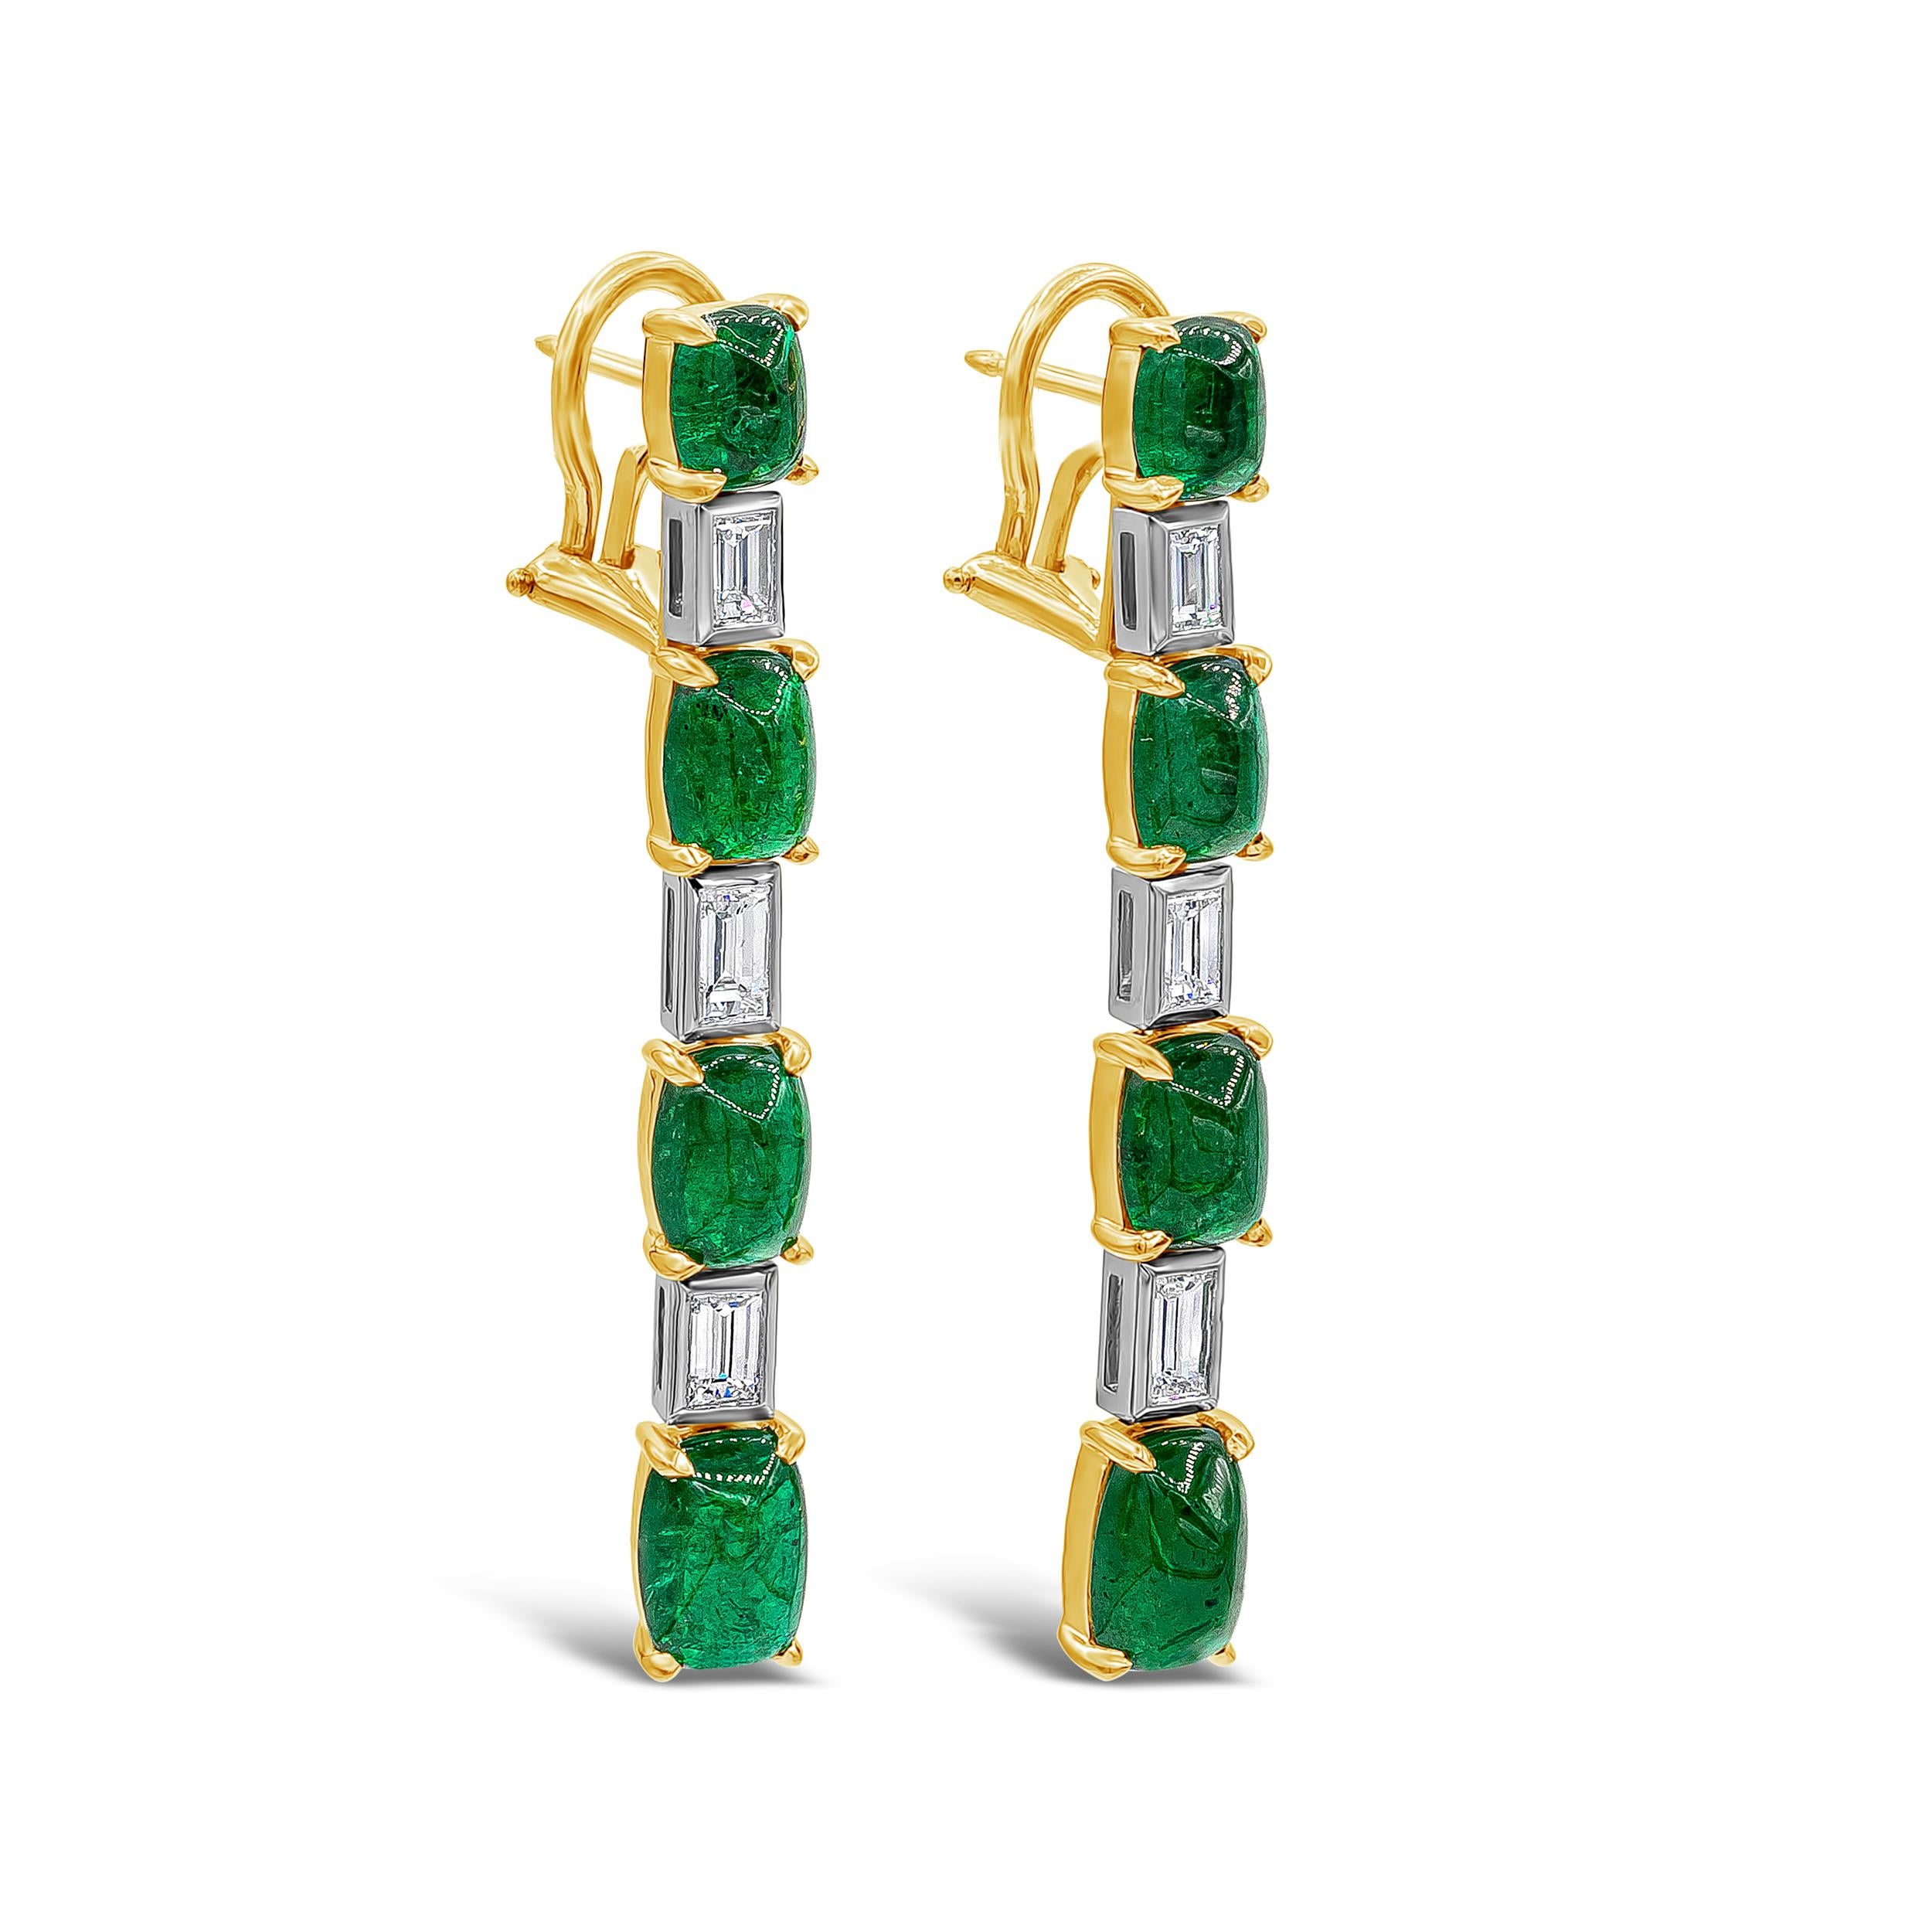 A unique and fashionable pair of drop earrings showcasing cabochon green emeralds that alternate with baguette diamonds, in a yellow gold and platinum mounting. Cabochon green emeralds weigh 10.26 carats total; diamonds weigh 1.22 carats total and